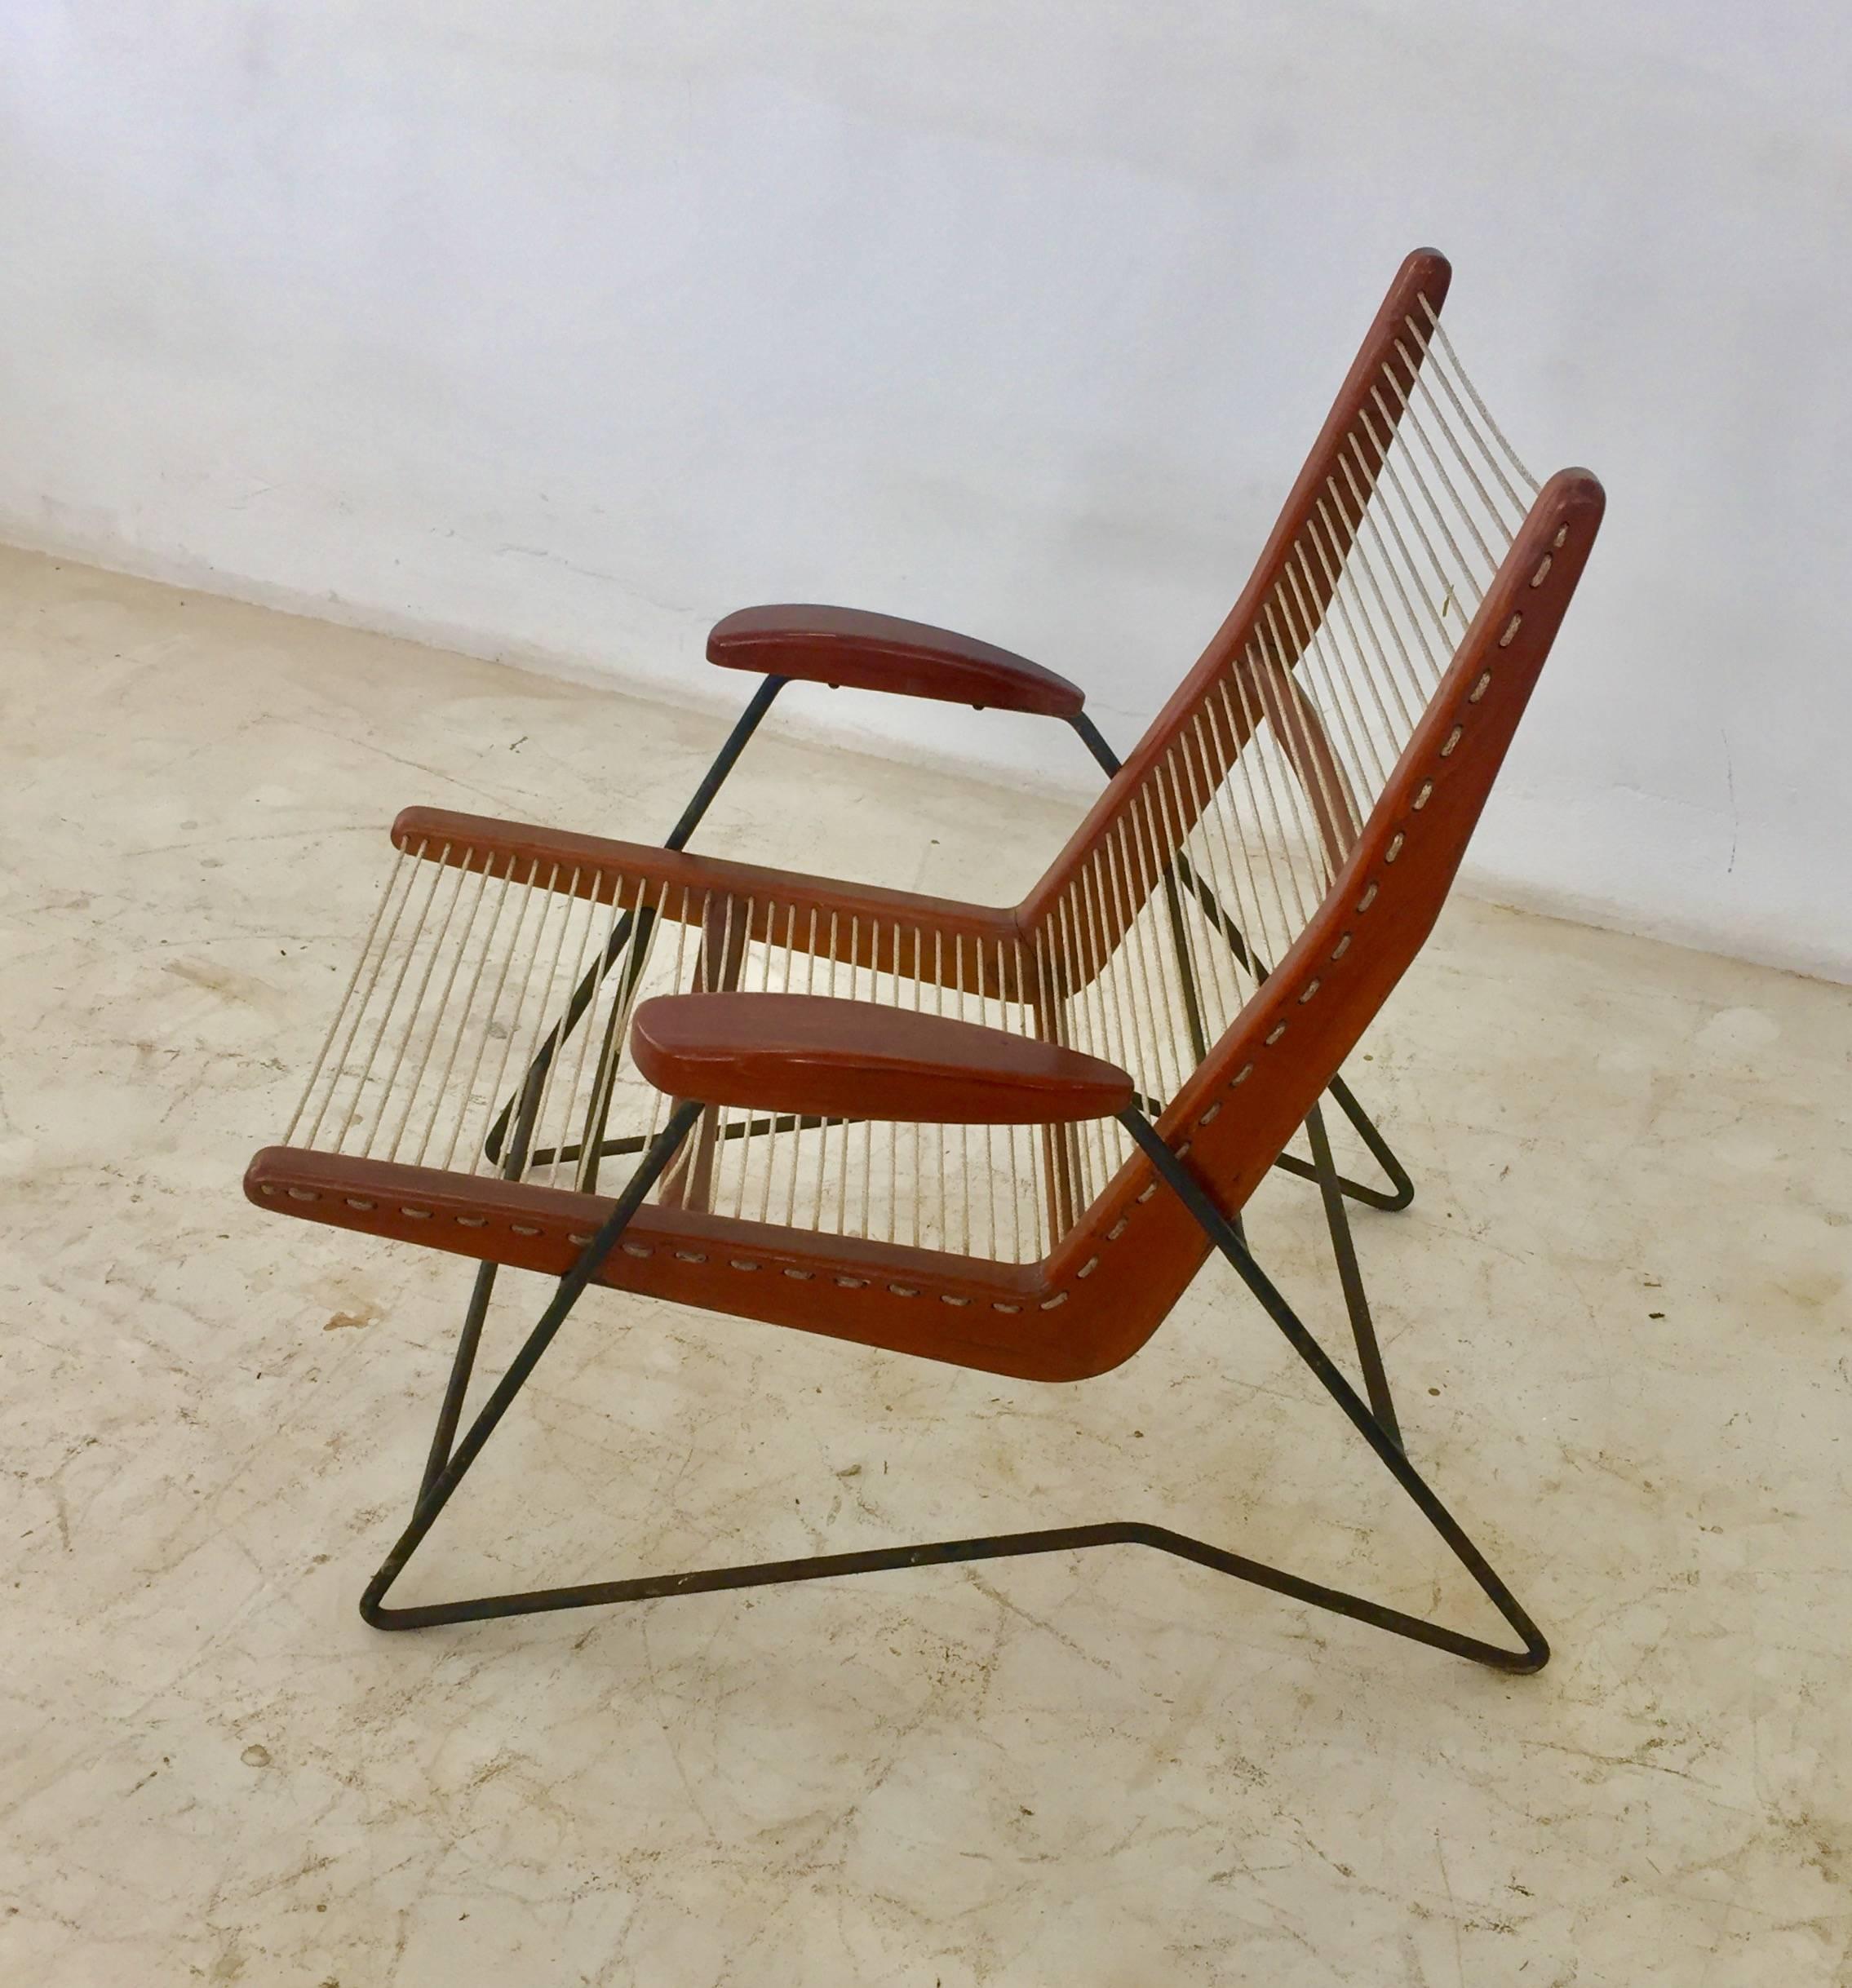 Amazing armchair, designed by Martin Eisler and Carlo Hauner, with iron structure and wood seat with string.